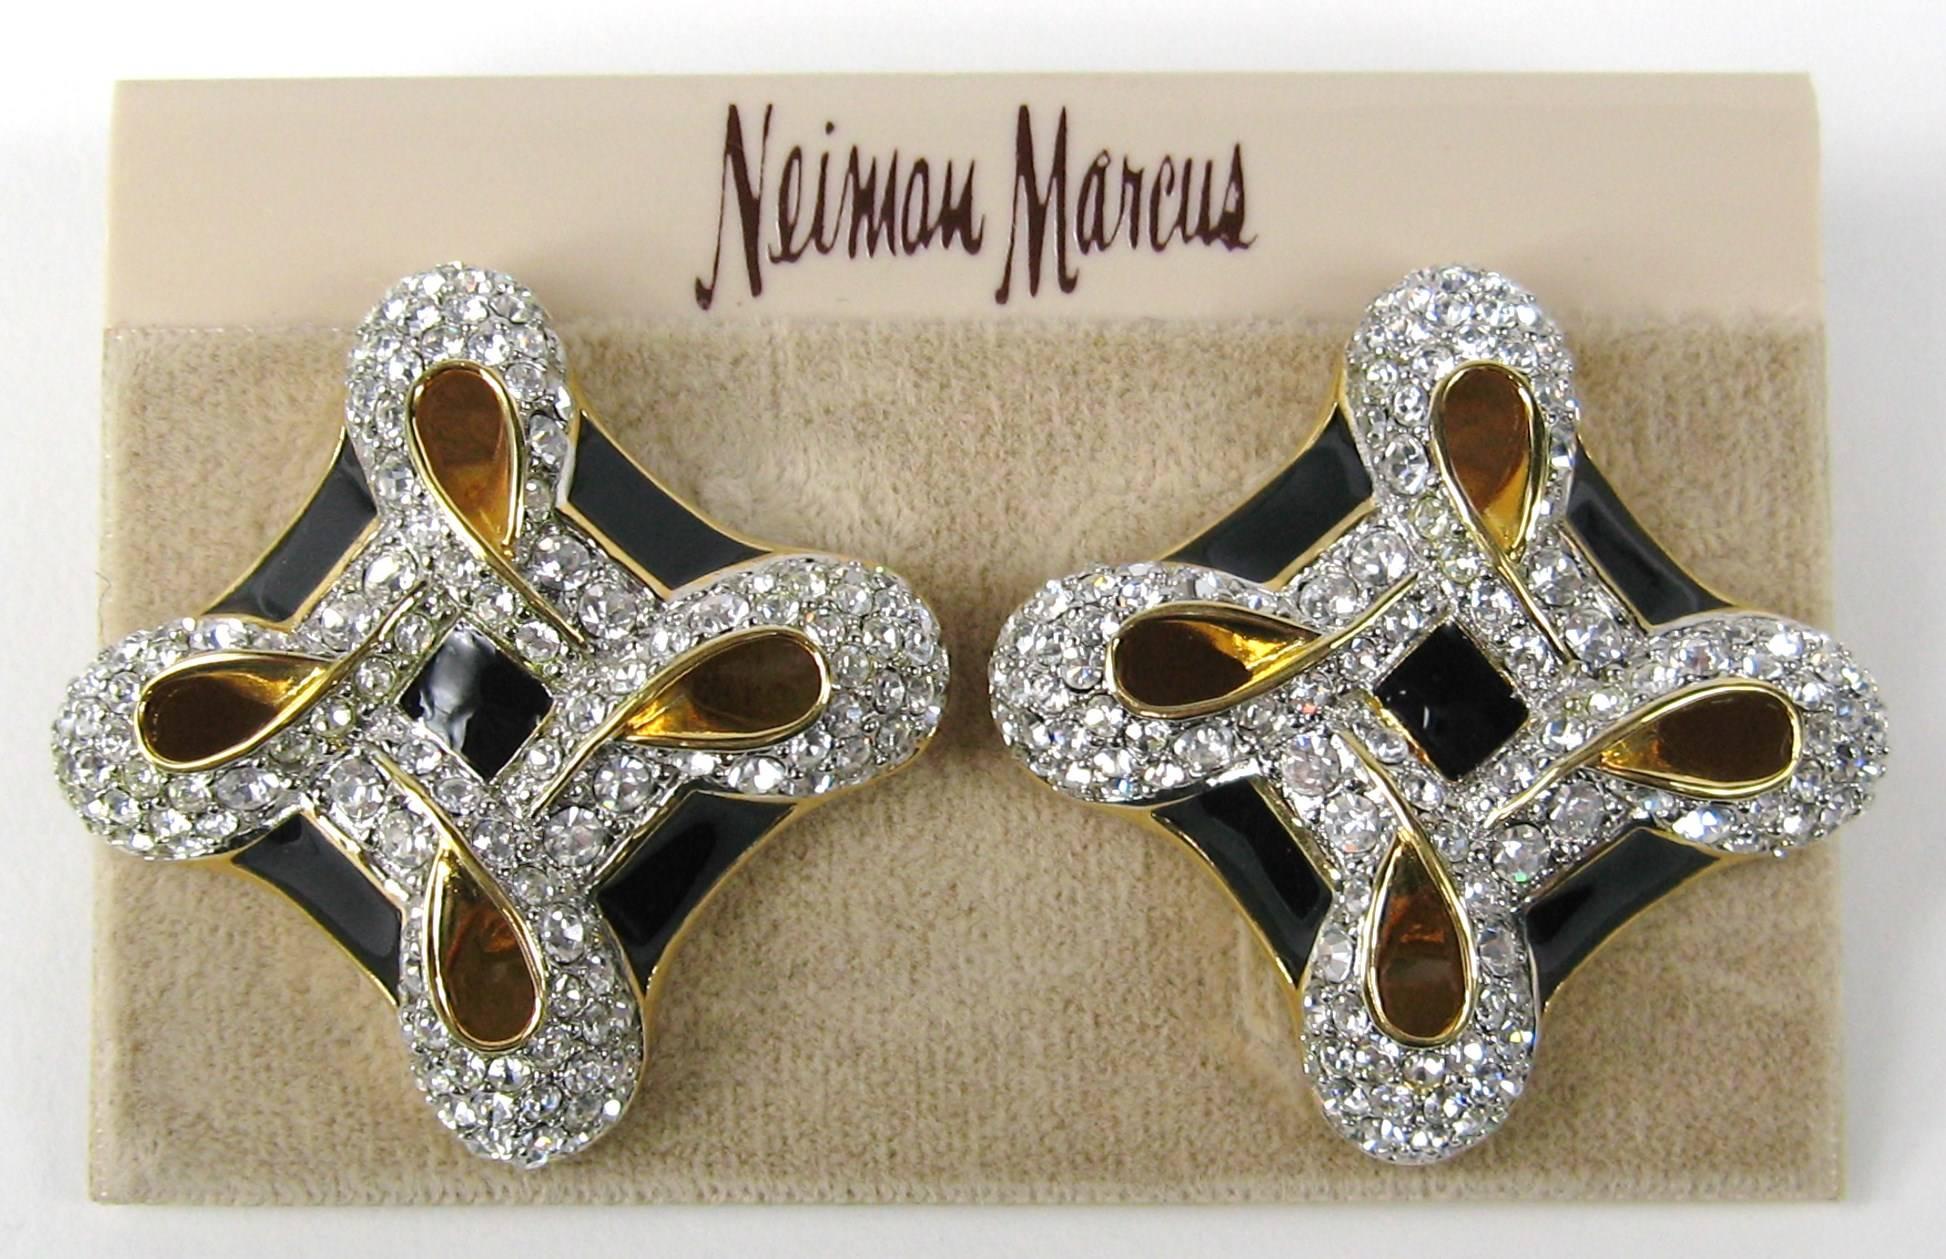 Stunning Swarovski Earrings. Still on original  Neiman Marcus earring card. Measuring 1.50 in x 1.50 in. Visit our store front for hundreds of designer costume jewelry as well as sterling silver. Be sure to follow us to get email updates of our new